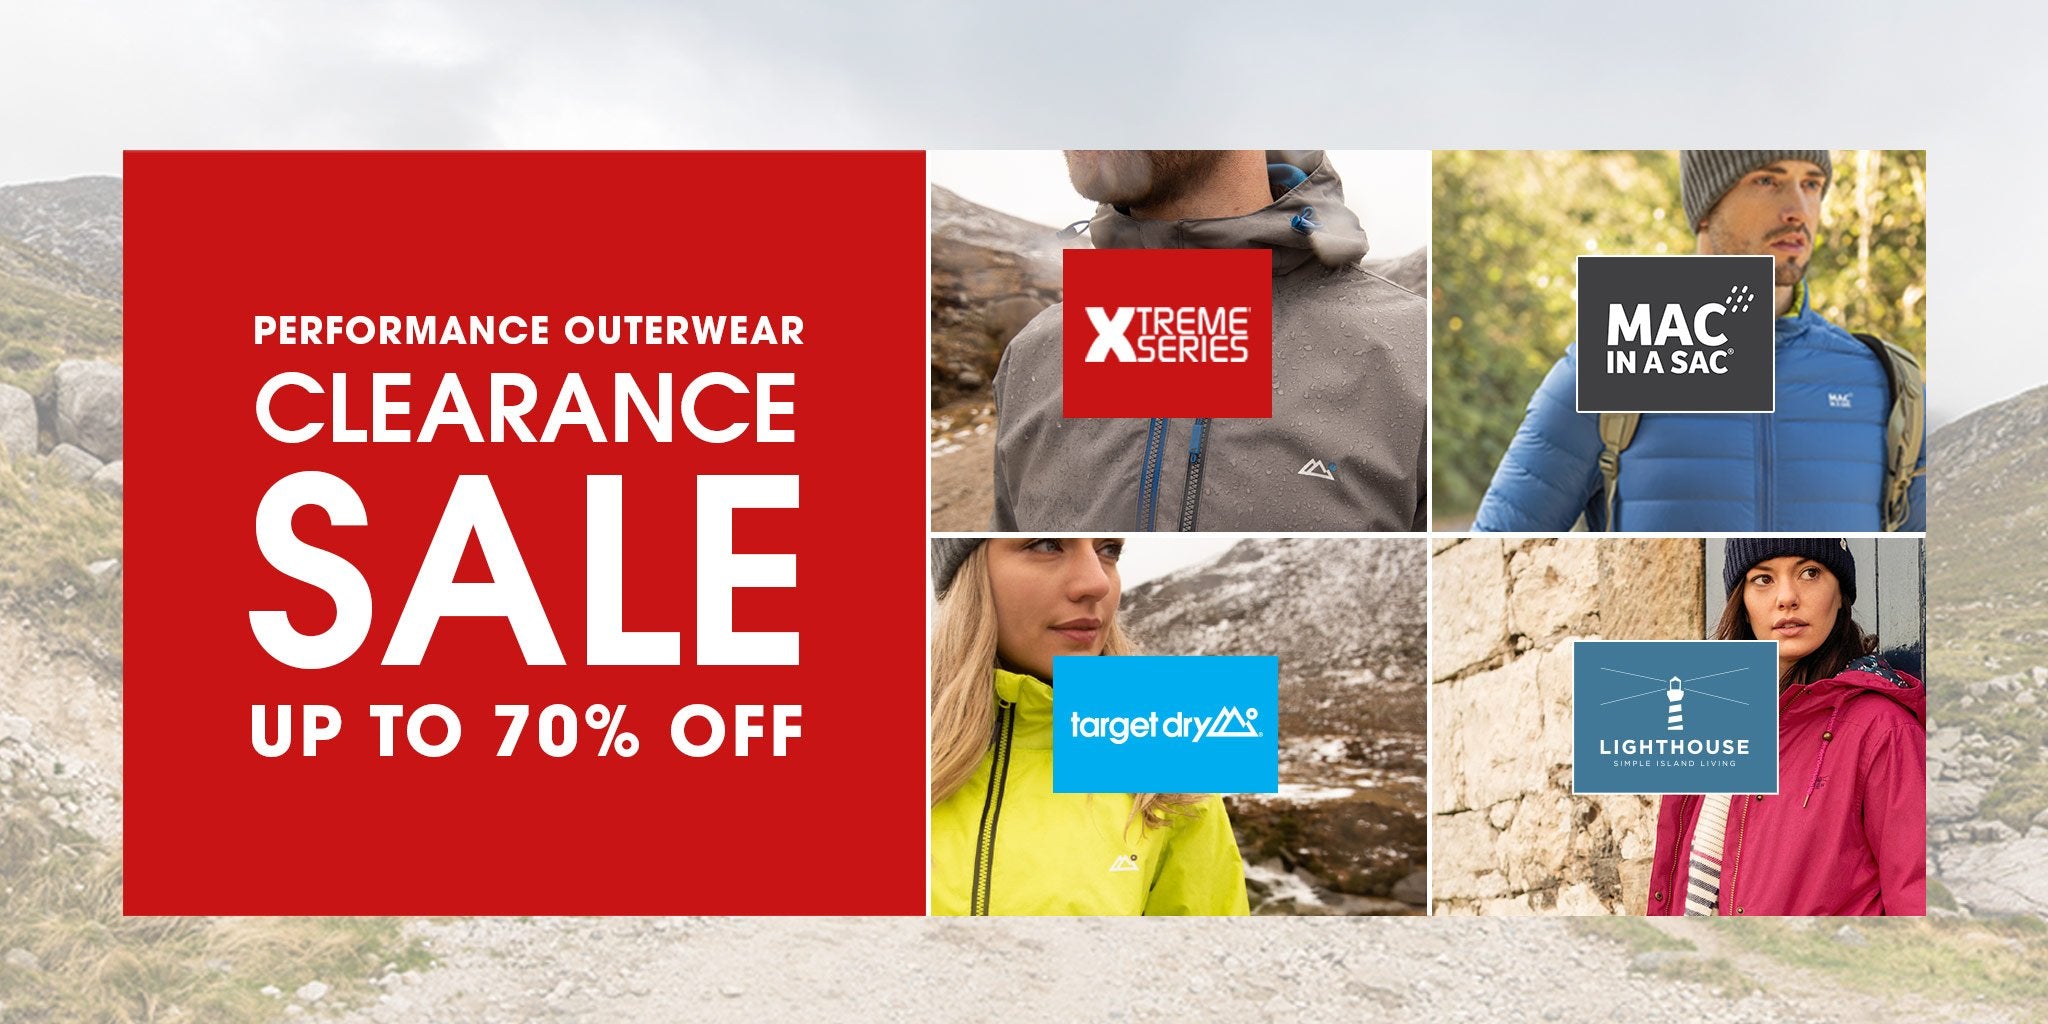 xtreme series, 40% off sale on technical outerwear